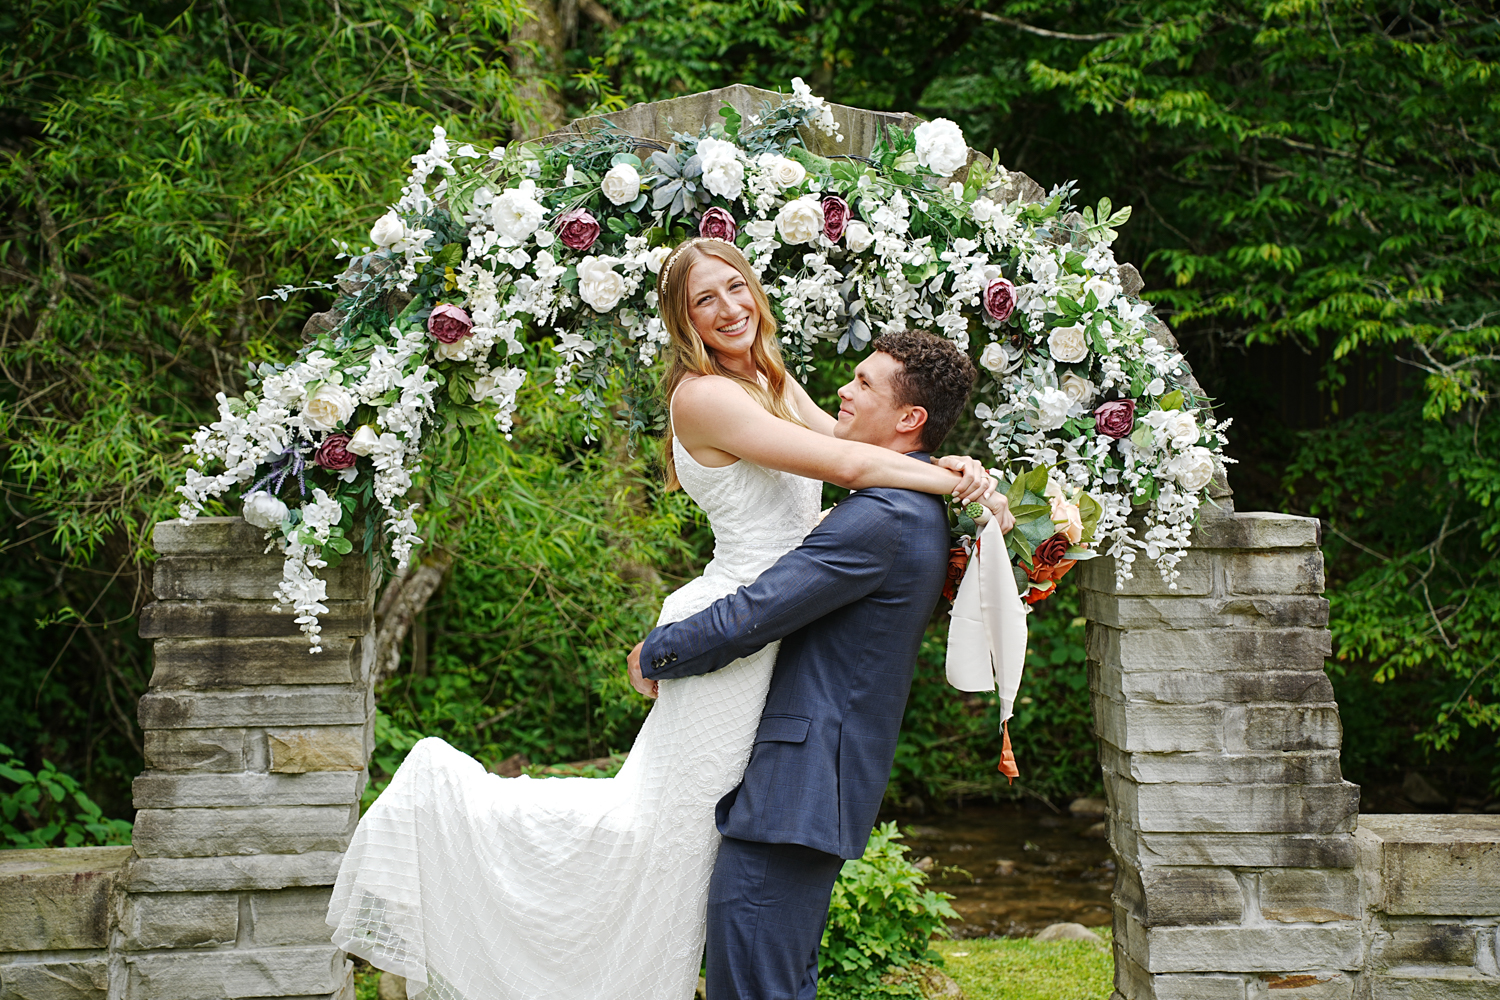 Groom lifting up his bride in a white sun dress on their wedding day at a stone arch covered in white and pink flowers